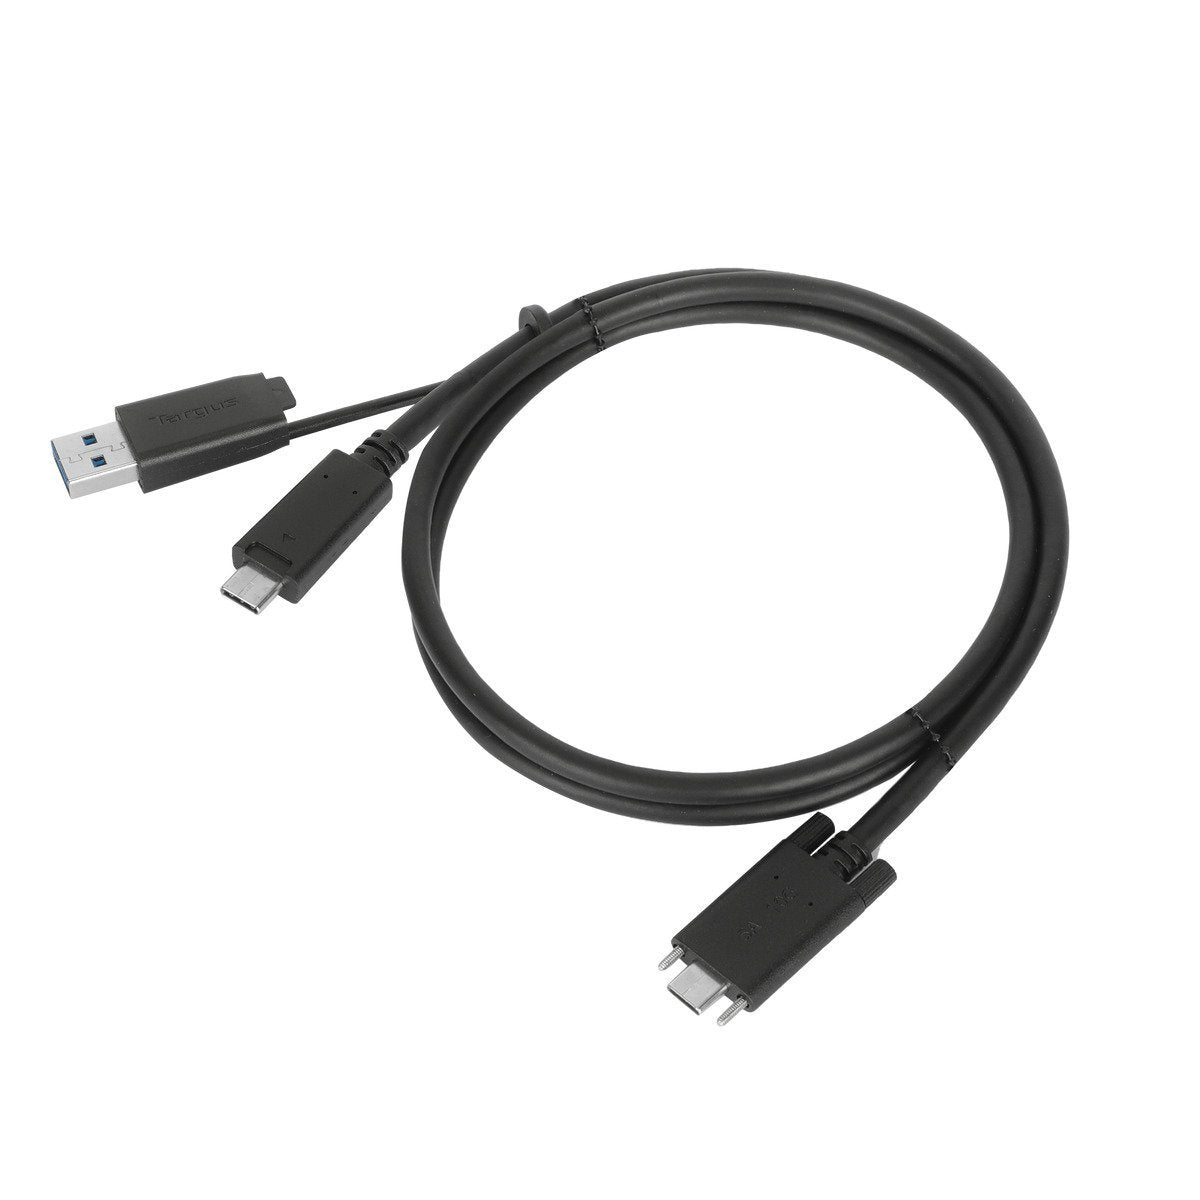 ChargeWorx USB Type-C to USB Type-A Male Cable CHA-CX4861RG B&H